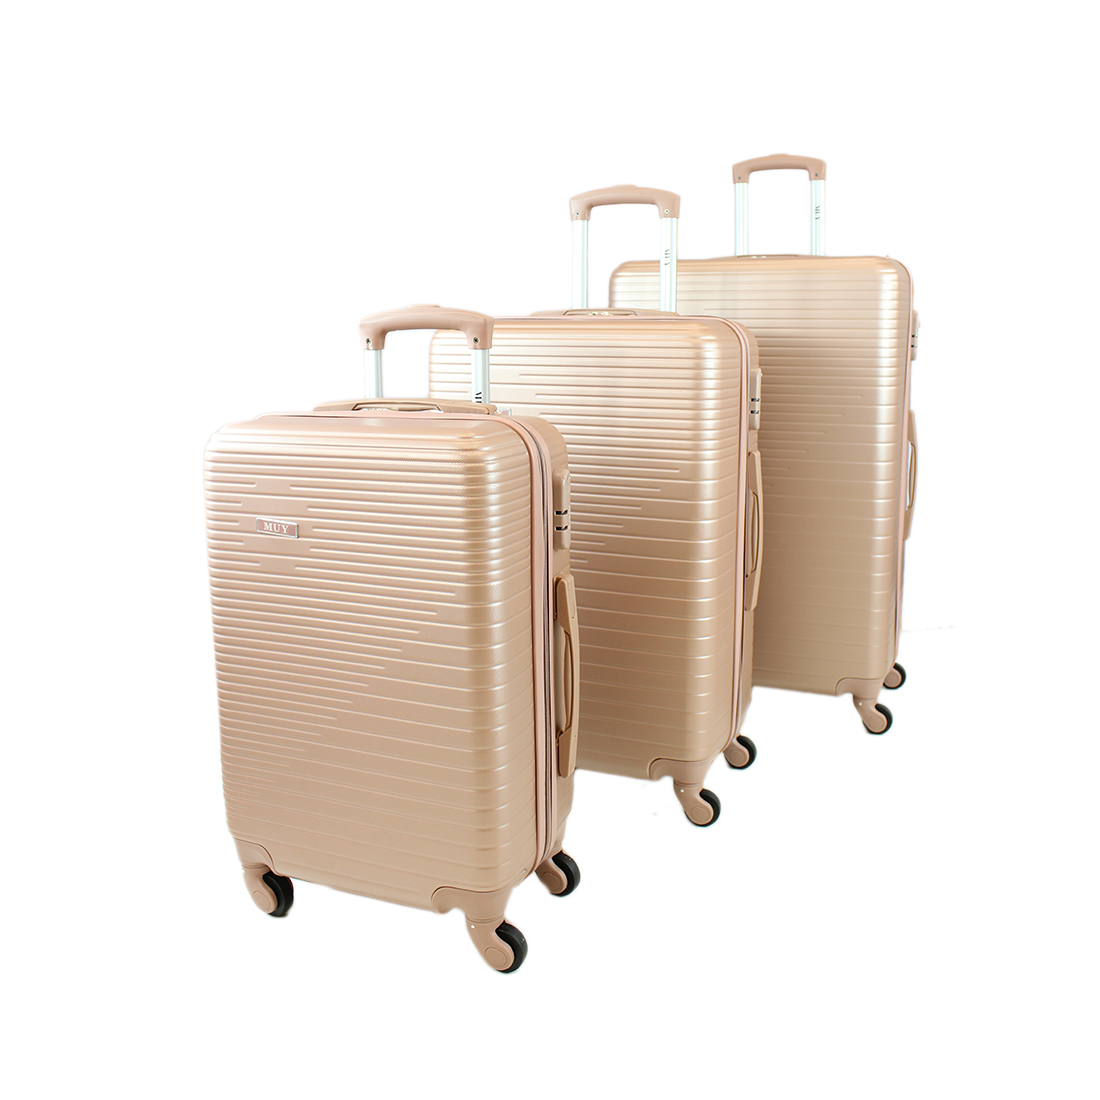 3 Piece Set - Hard-wearing suitcase suitable for any type of travel